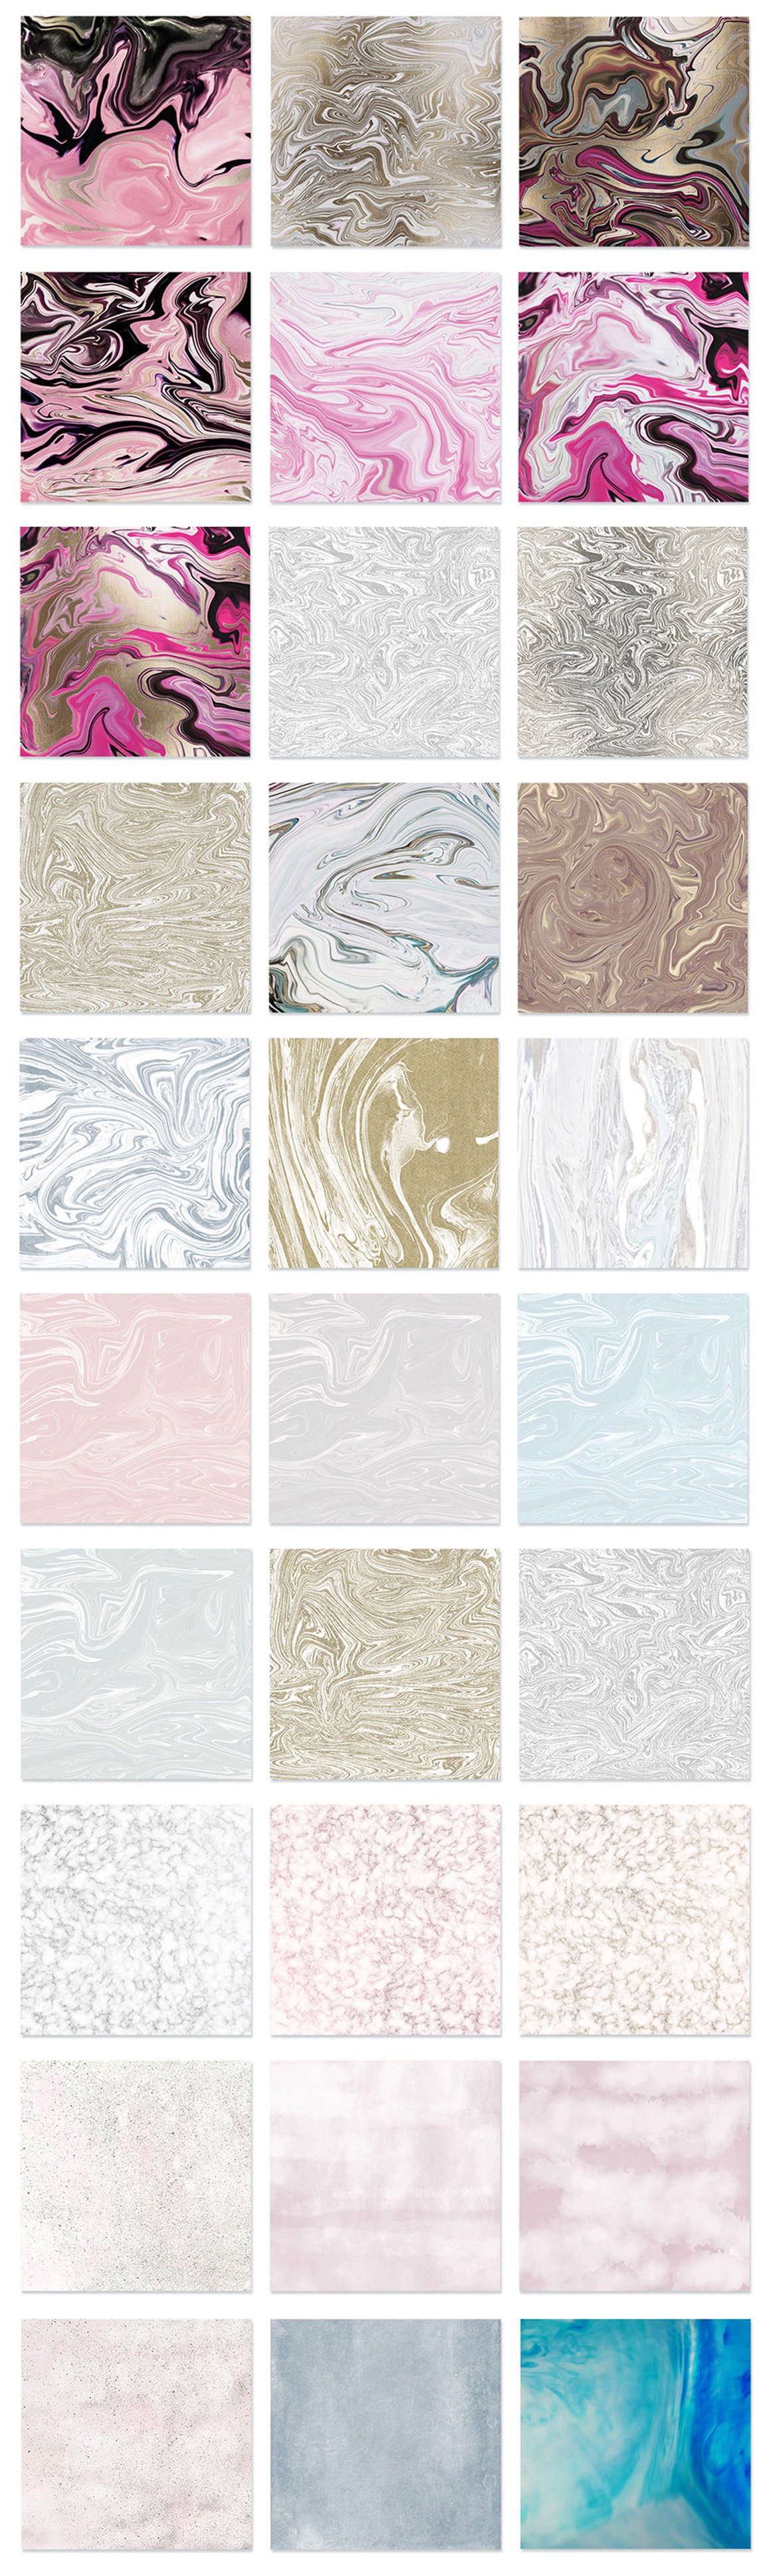 Modern Fluid & More Texture Background Collection